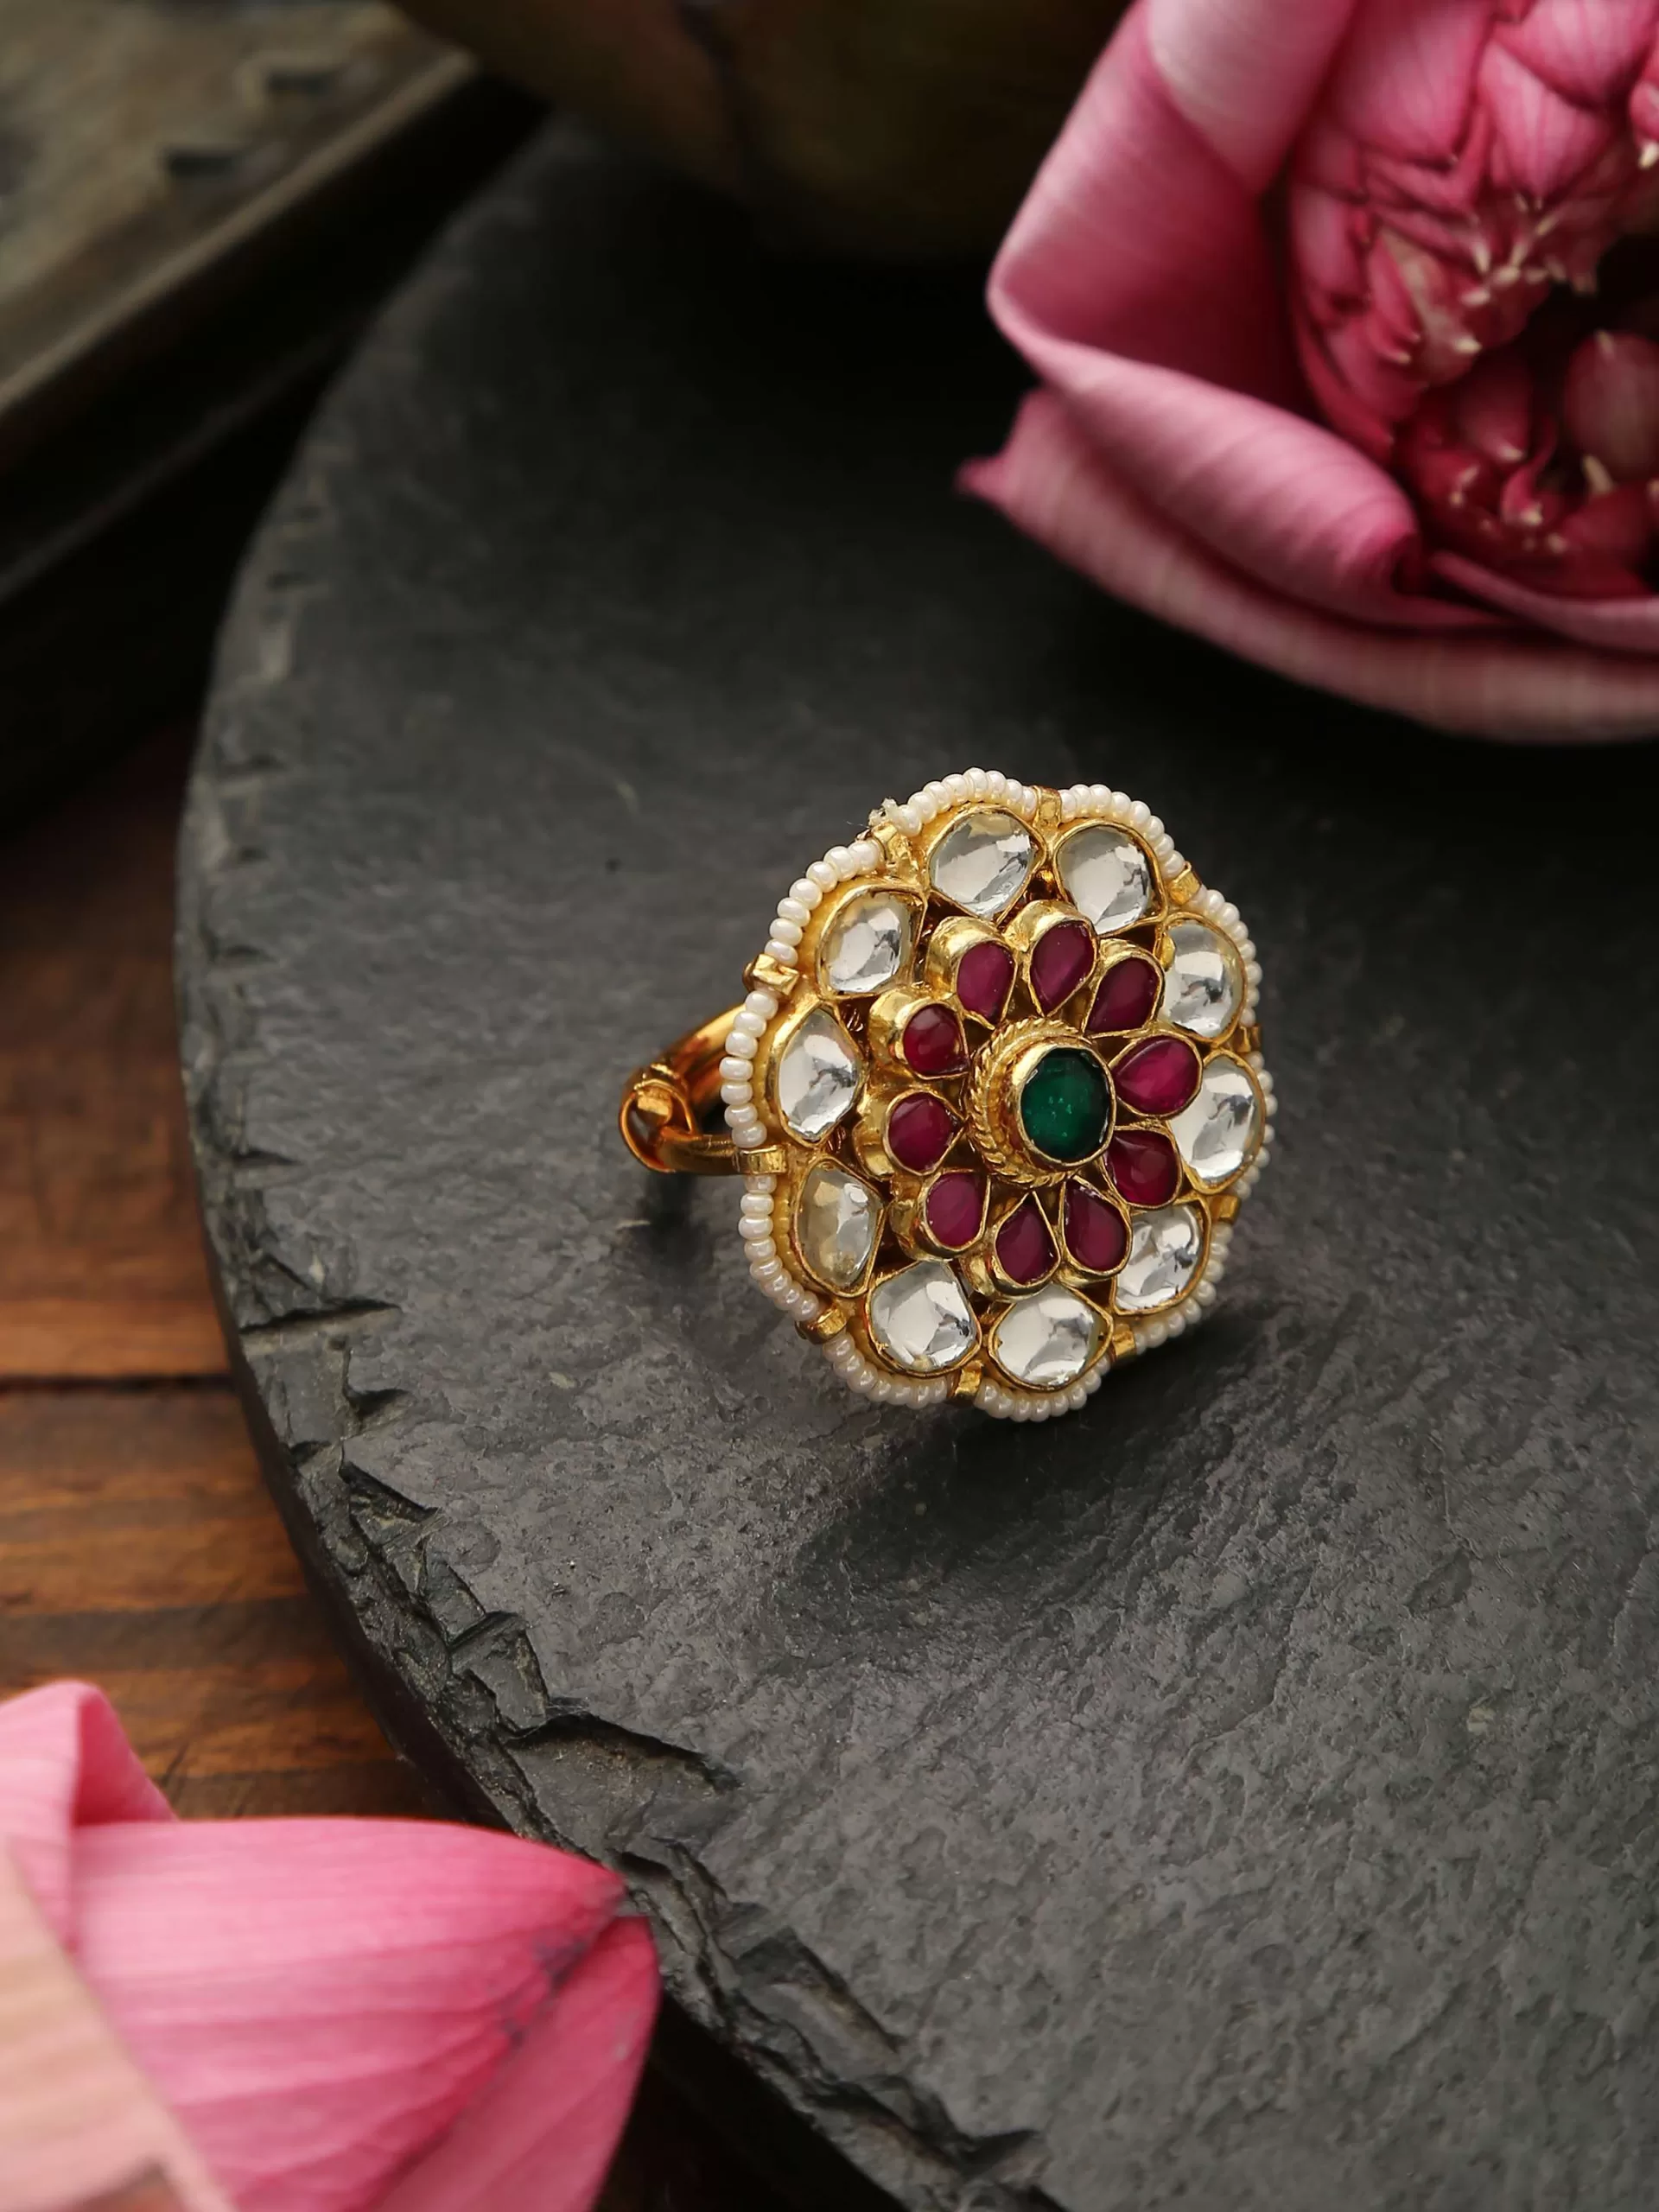 Amazon.com: Red Kundan 2 Finger Ring Linked With Pearl Chain Adjustable  Double Rings Teardrop White Kundan Flower Ethnic Fashion Jewelry  Contemporary Handmade Unique Traditional Jewelry Indian Designer : Handmade  Products